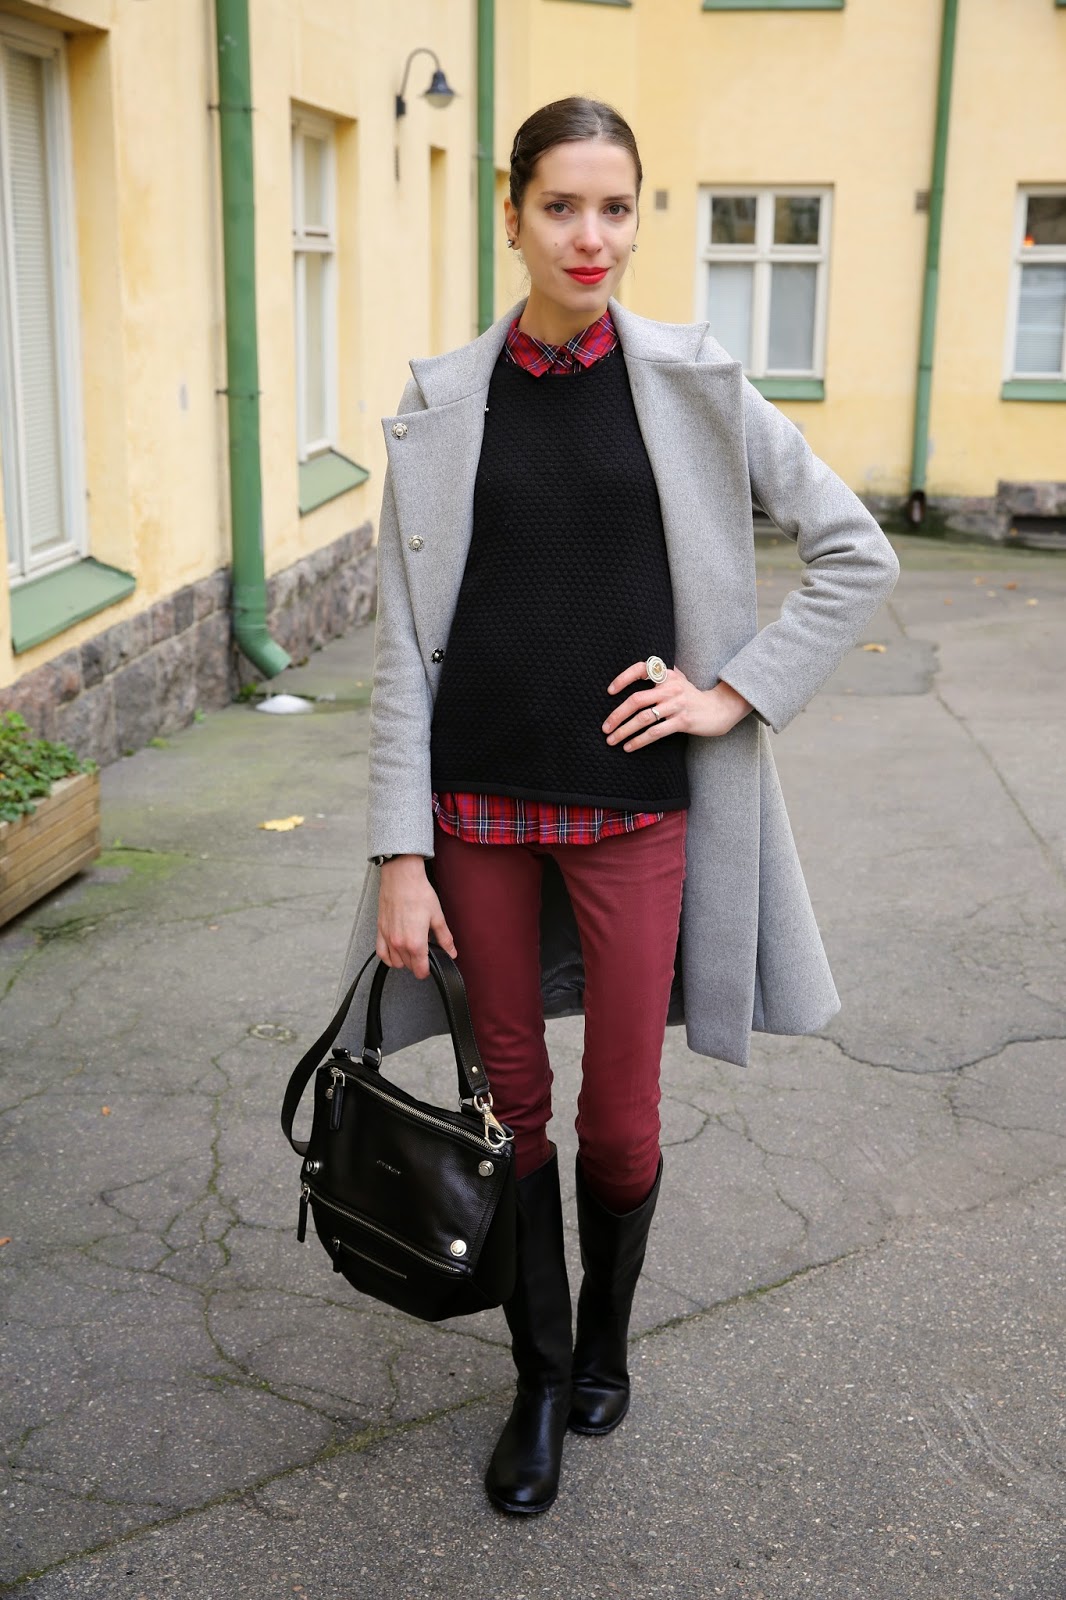 Outfit post - Layers - L'ART OF FASHIONL'ART OF FASHION